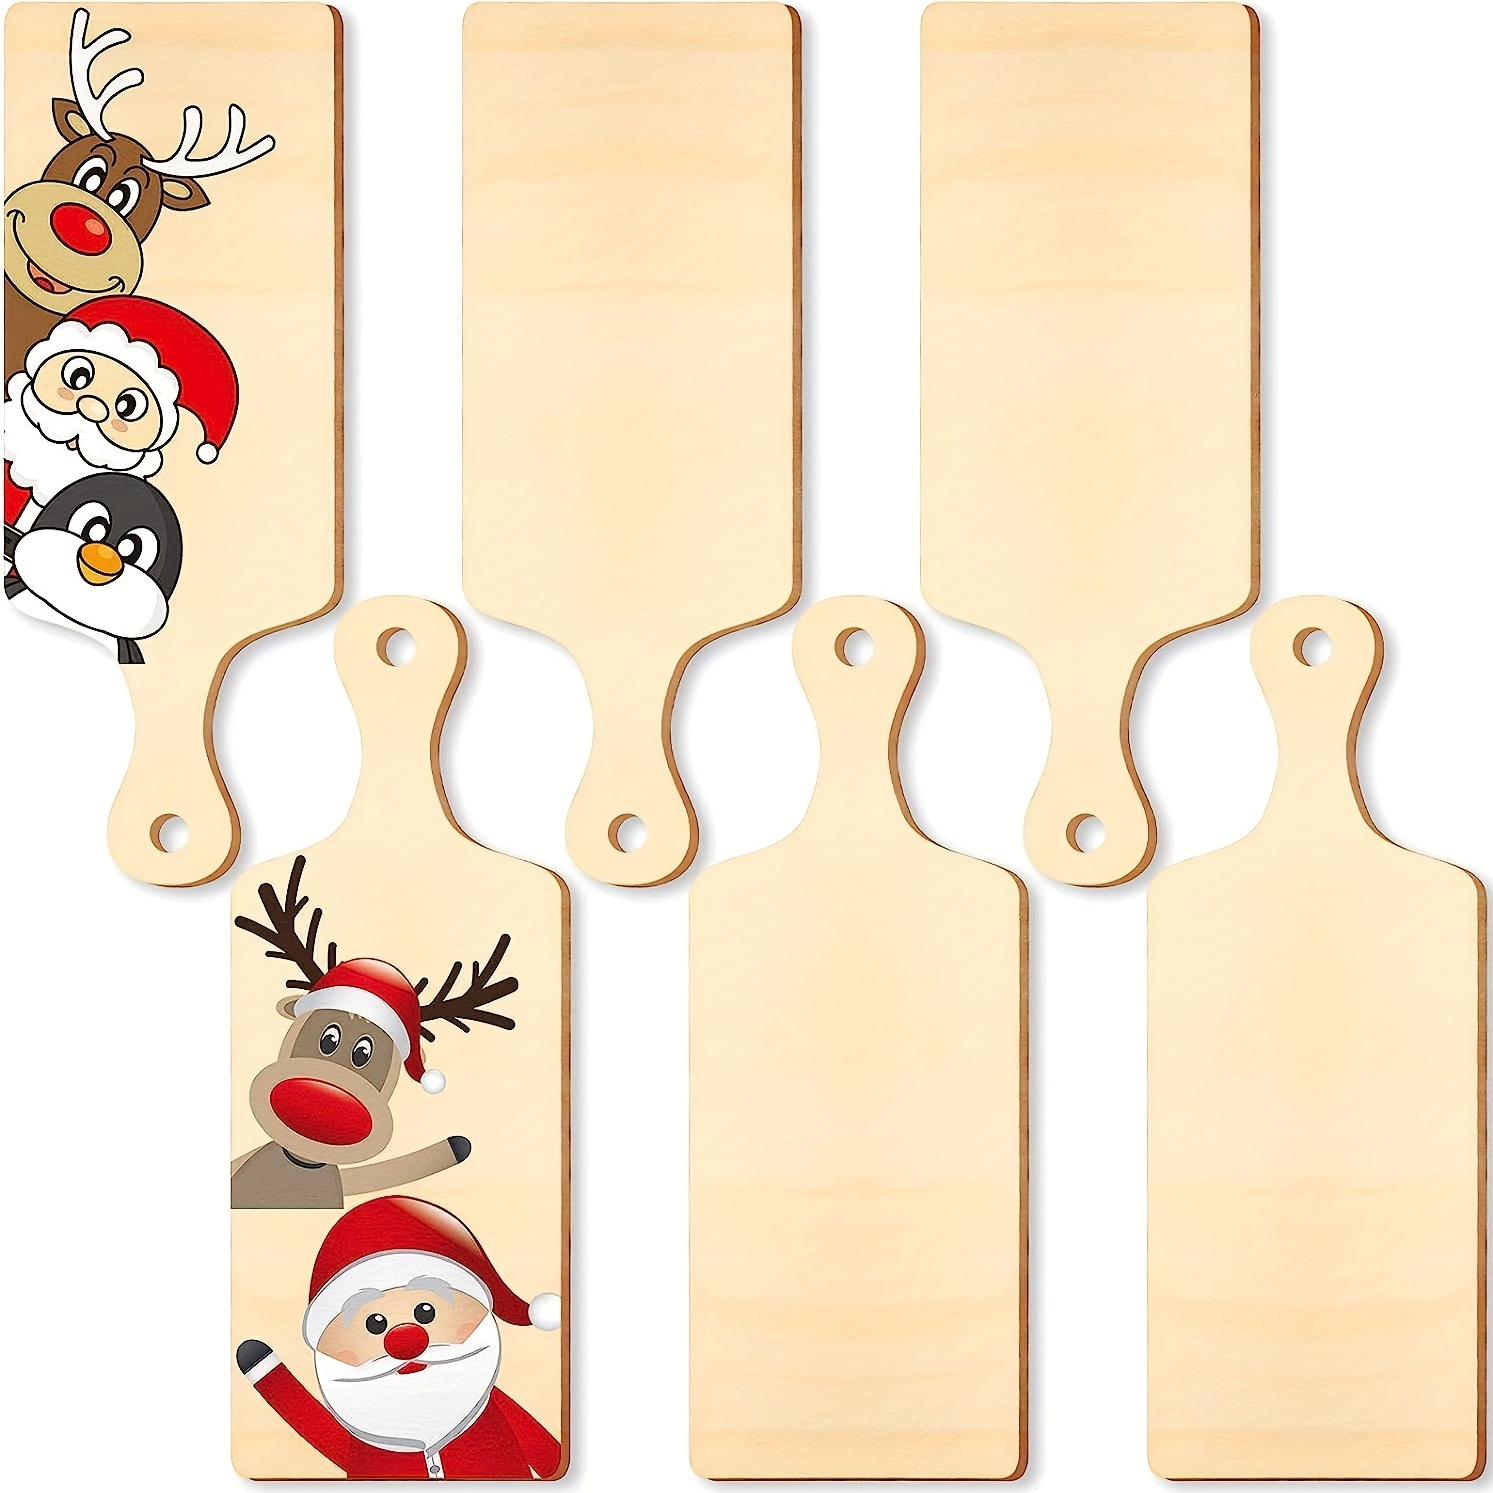 Marsui 12 Pieces Mini Wooden Cutting Board with Handle Valentine's Day  Small Chopping Board Craft Wooden Paddle Board for DIY Kitchen Home  Decor(9.4 x